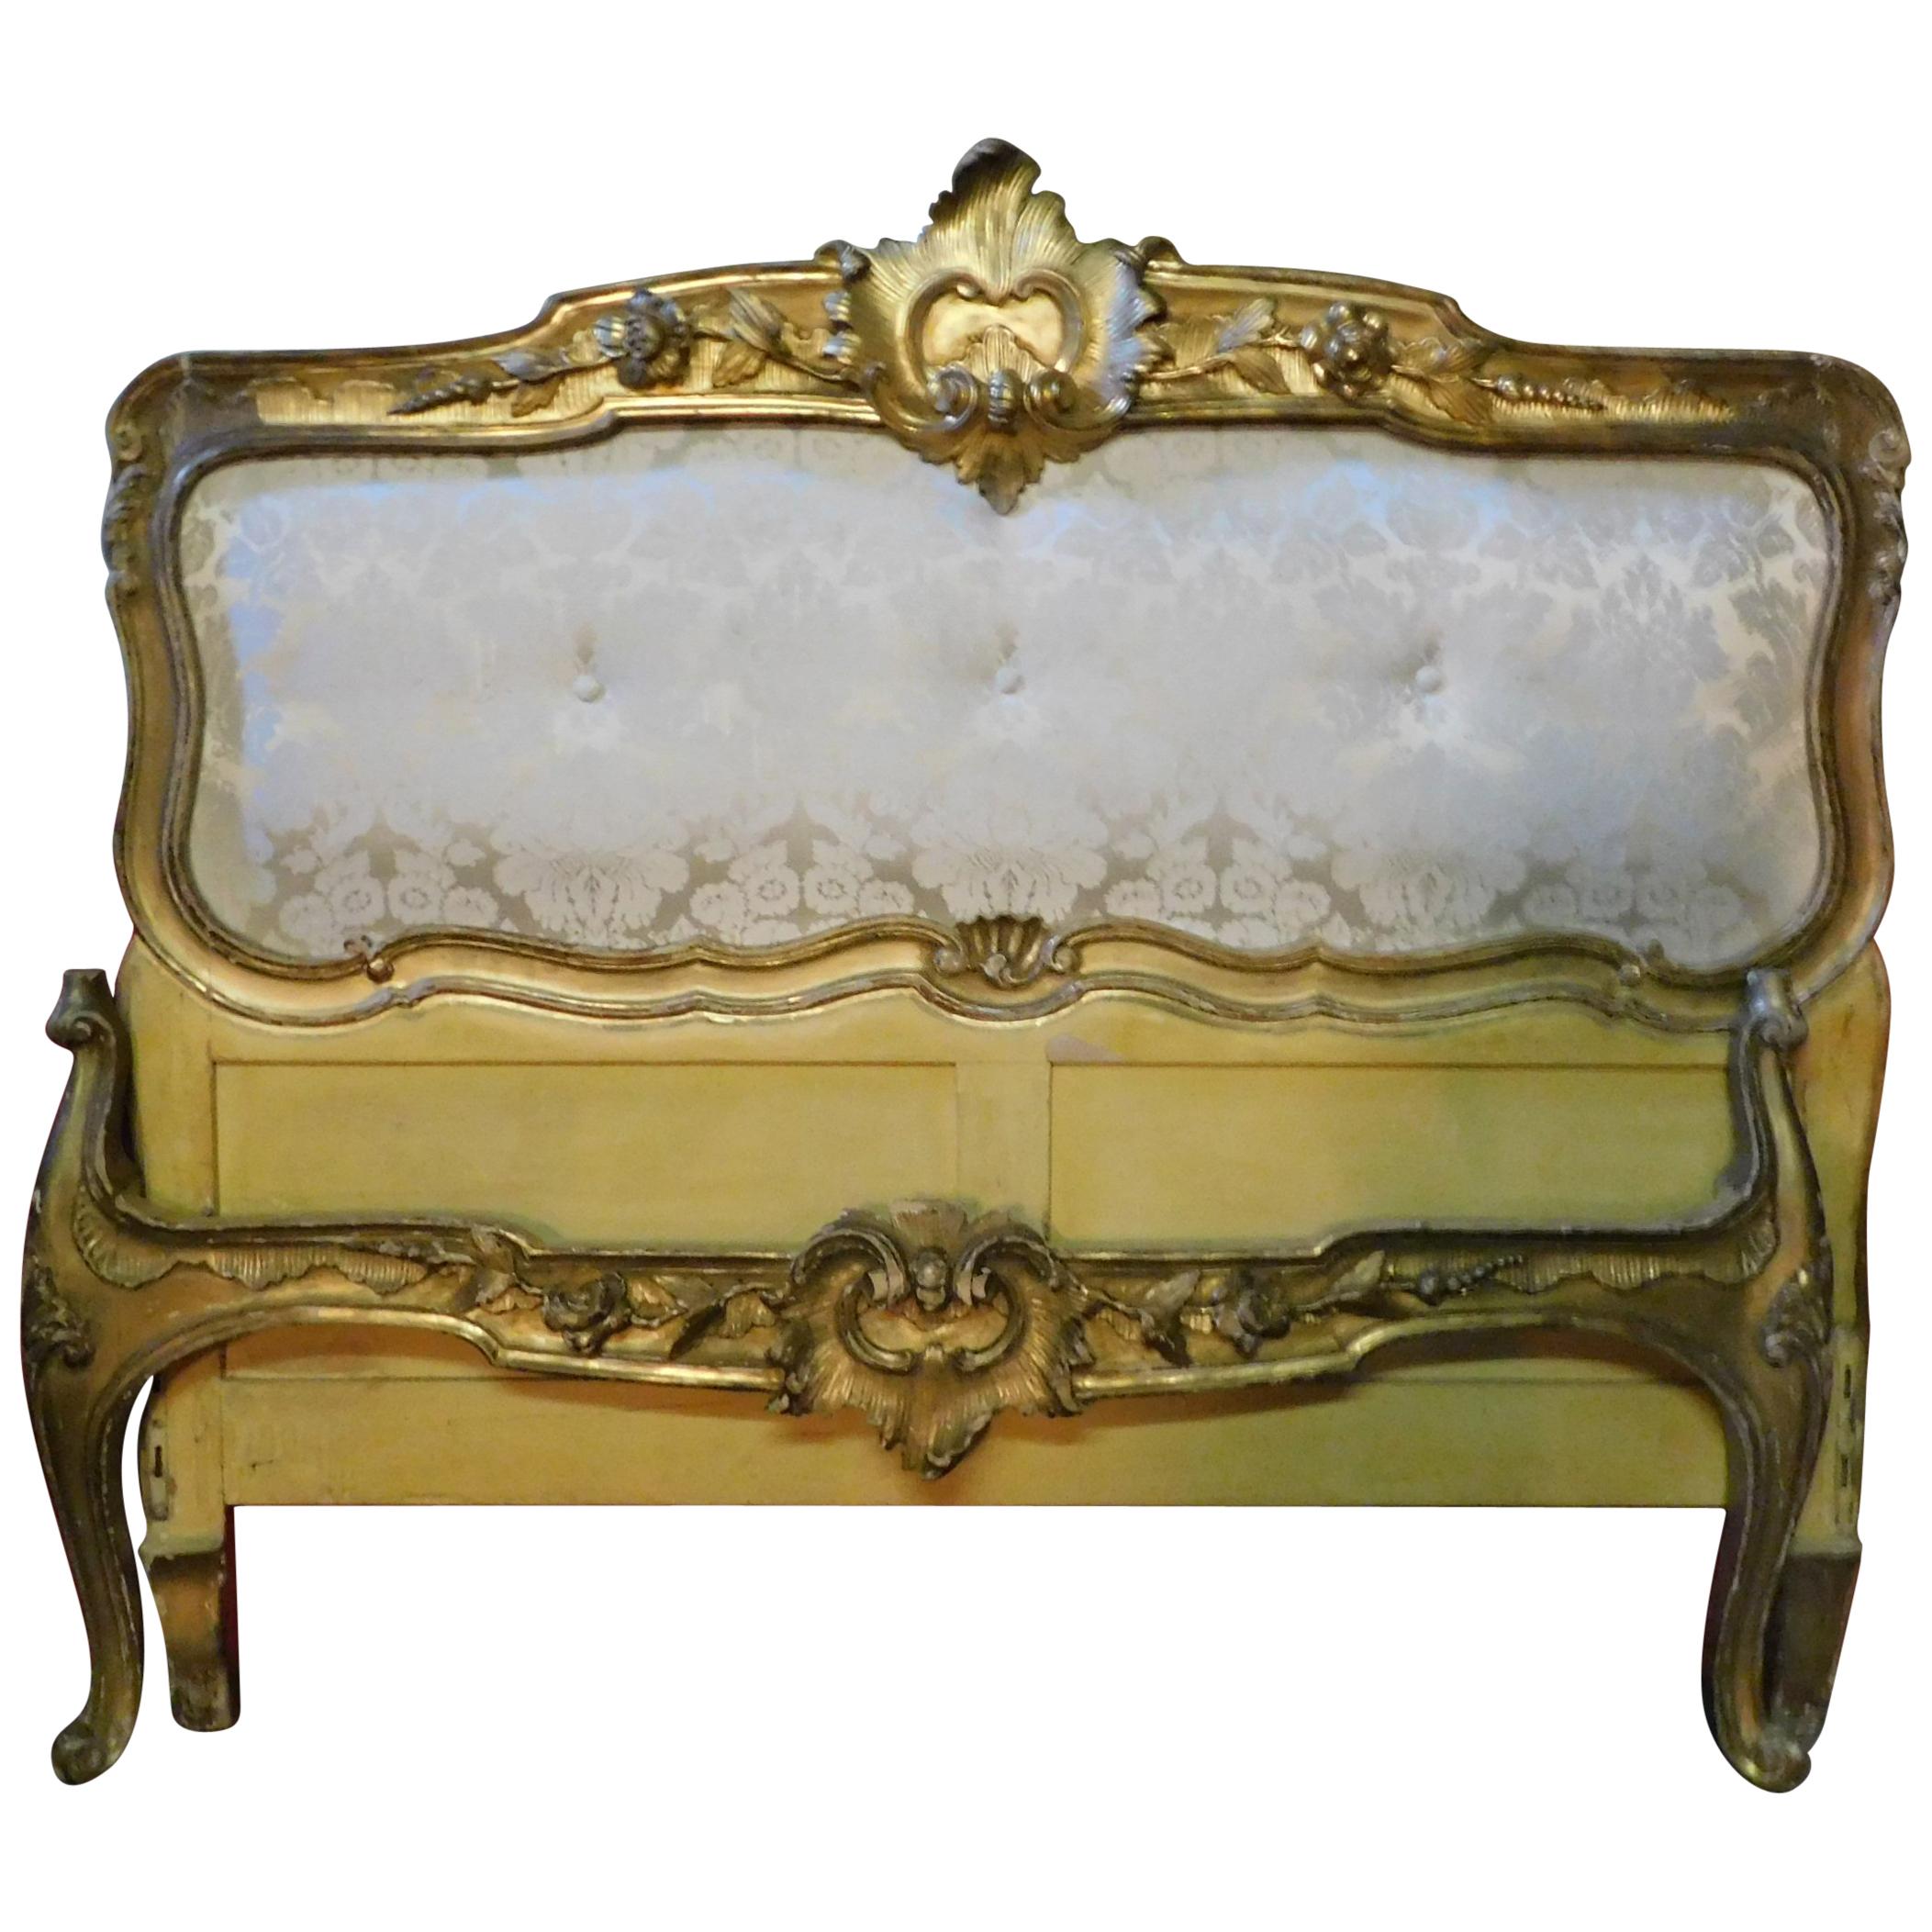 19th Century Antique Golden Bed with Damask Lined Headboard